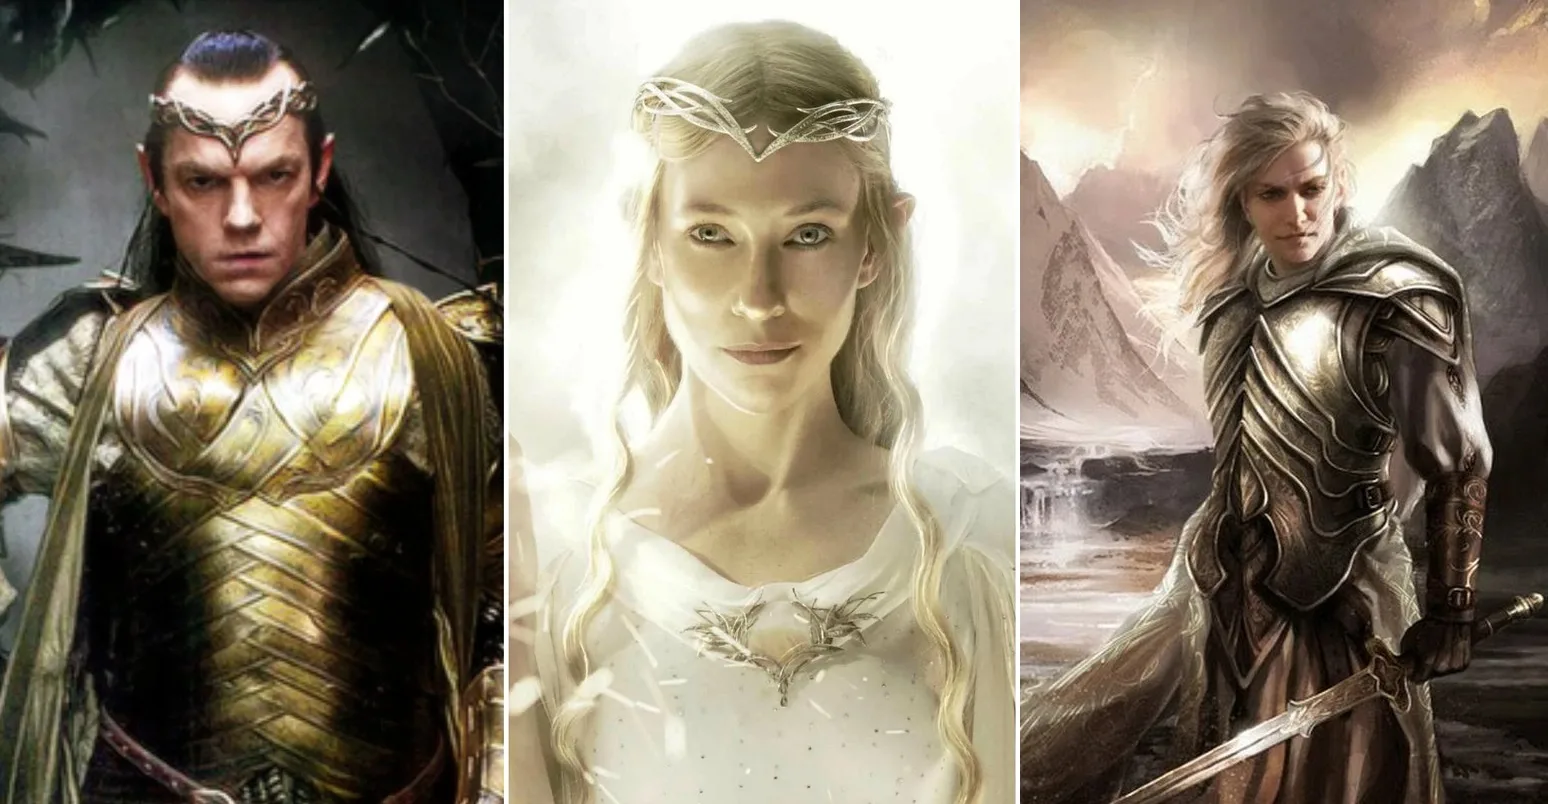 11 Most Powerful Elves in Middle Earth & Lord of the Rings (Ranked)